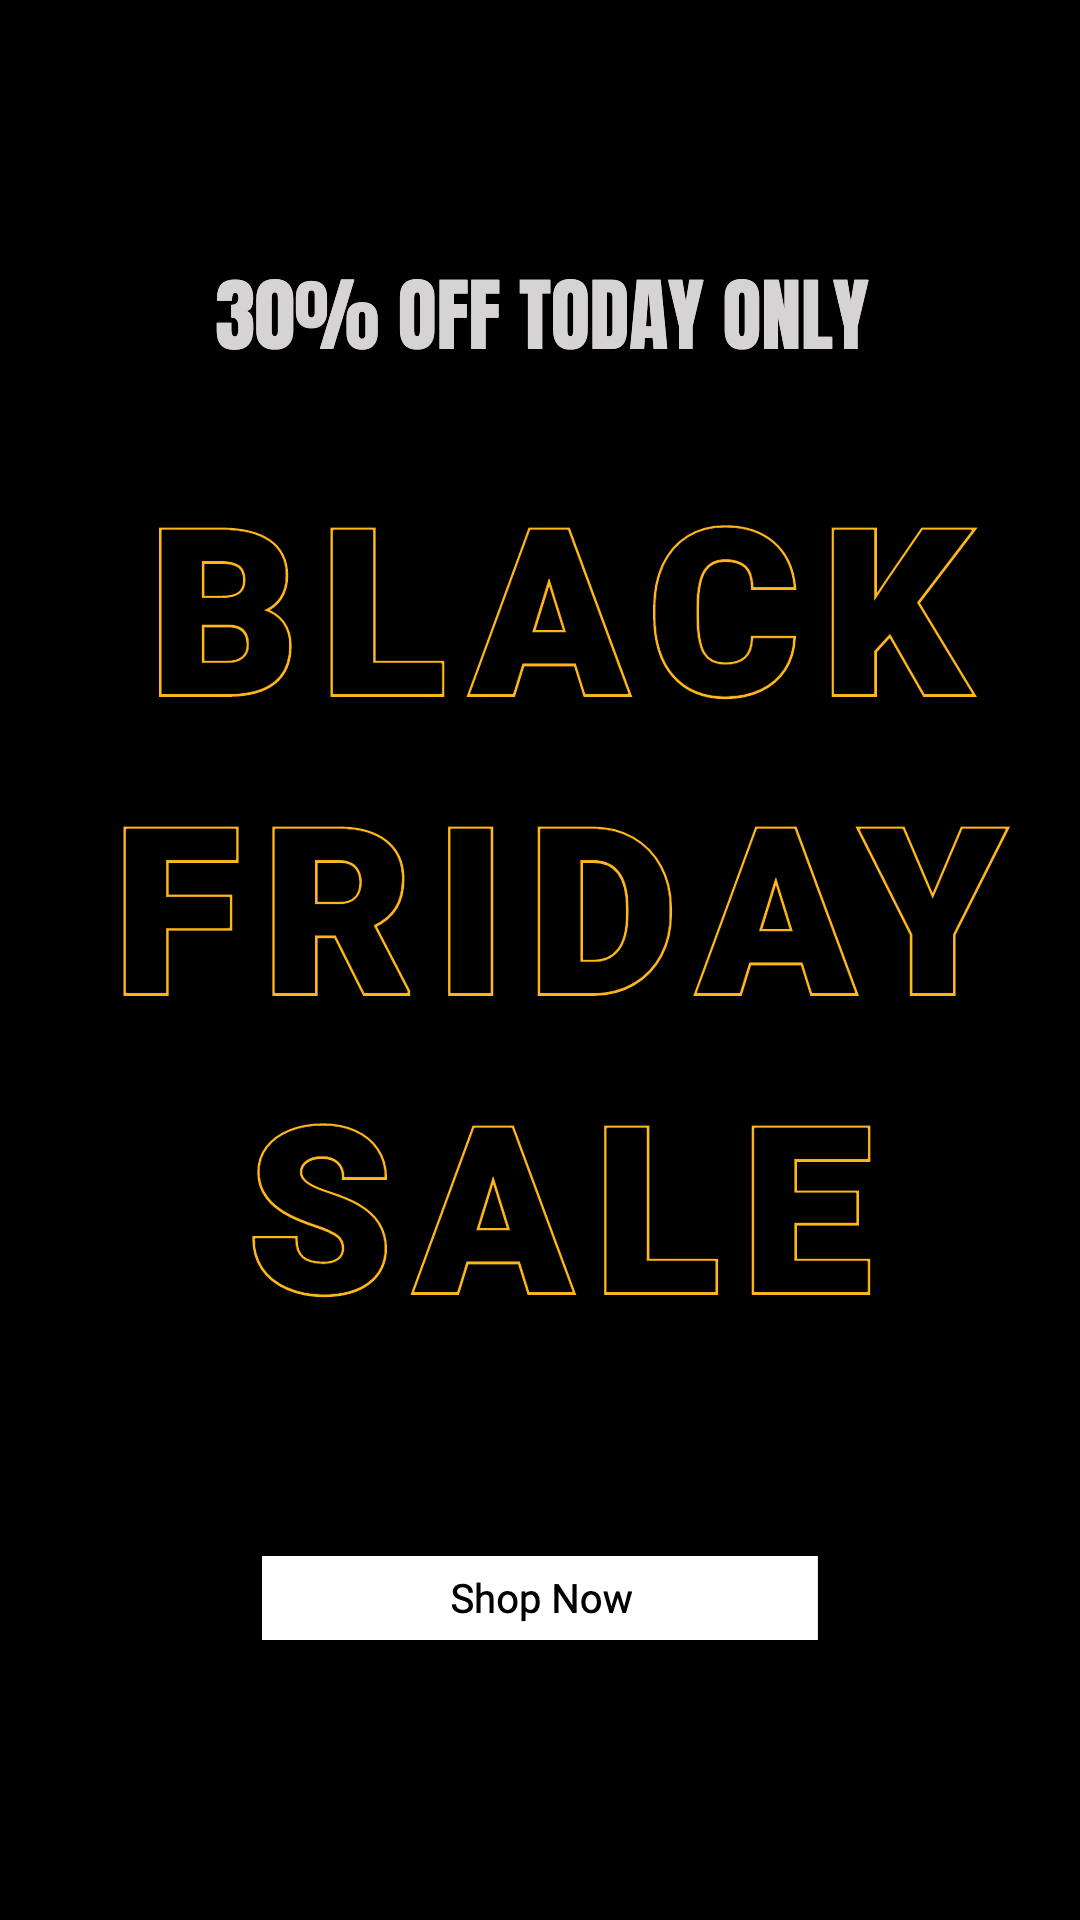 Pure Black Background Simple Black Friday Promotion Ecommerce Story预览效果